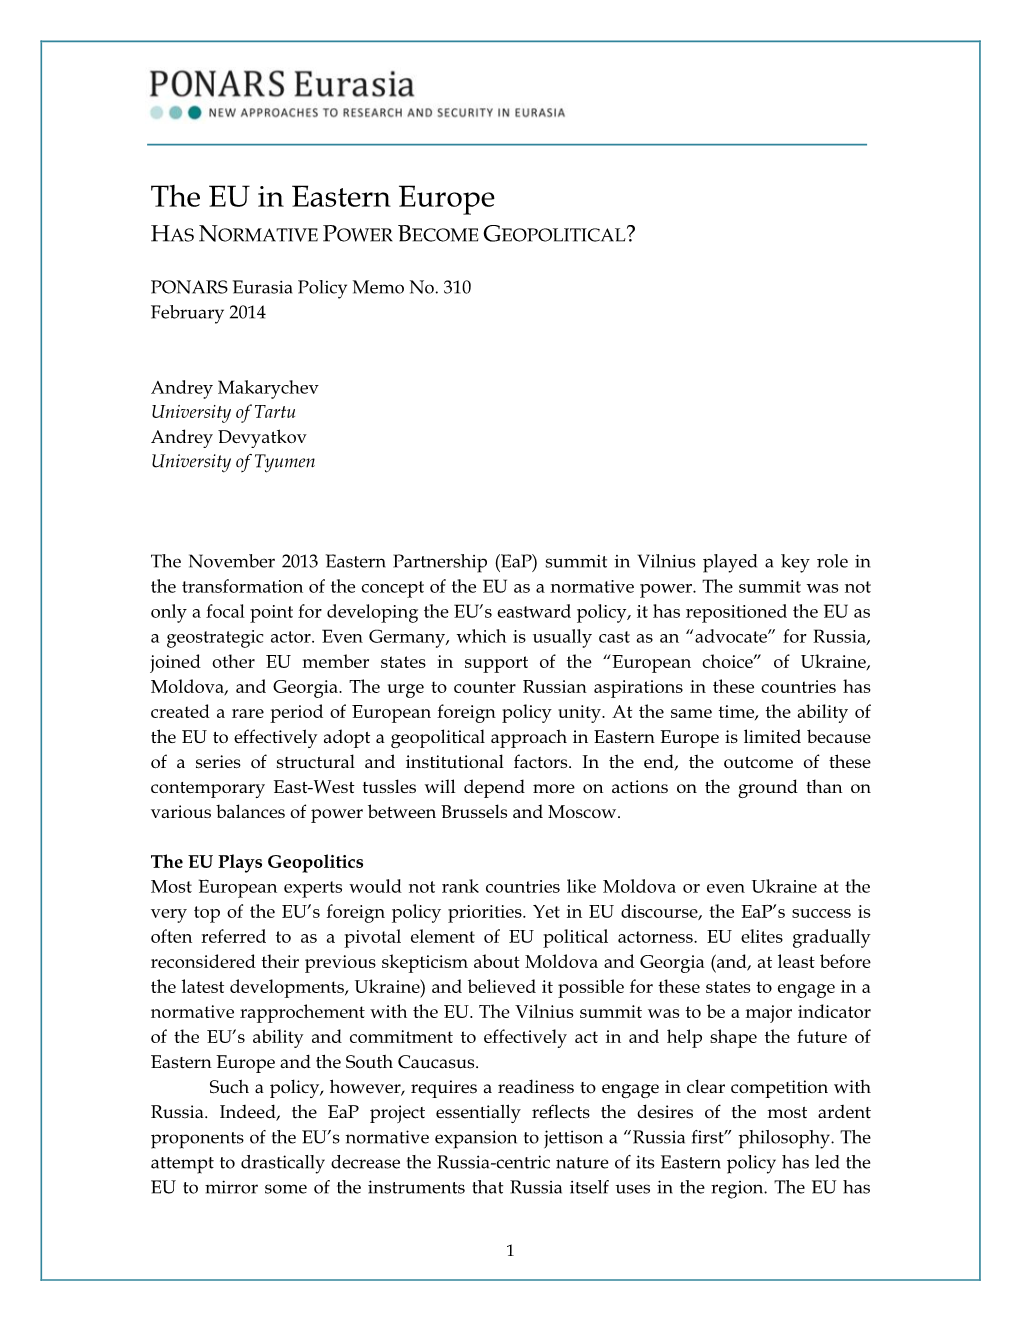 The EU in Eastern Europe HAS NORMATIVE POWER BECOME GEOPOLITICAL?